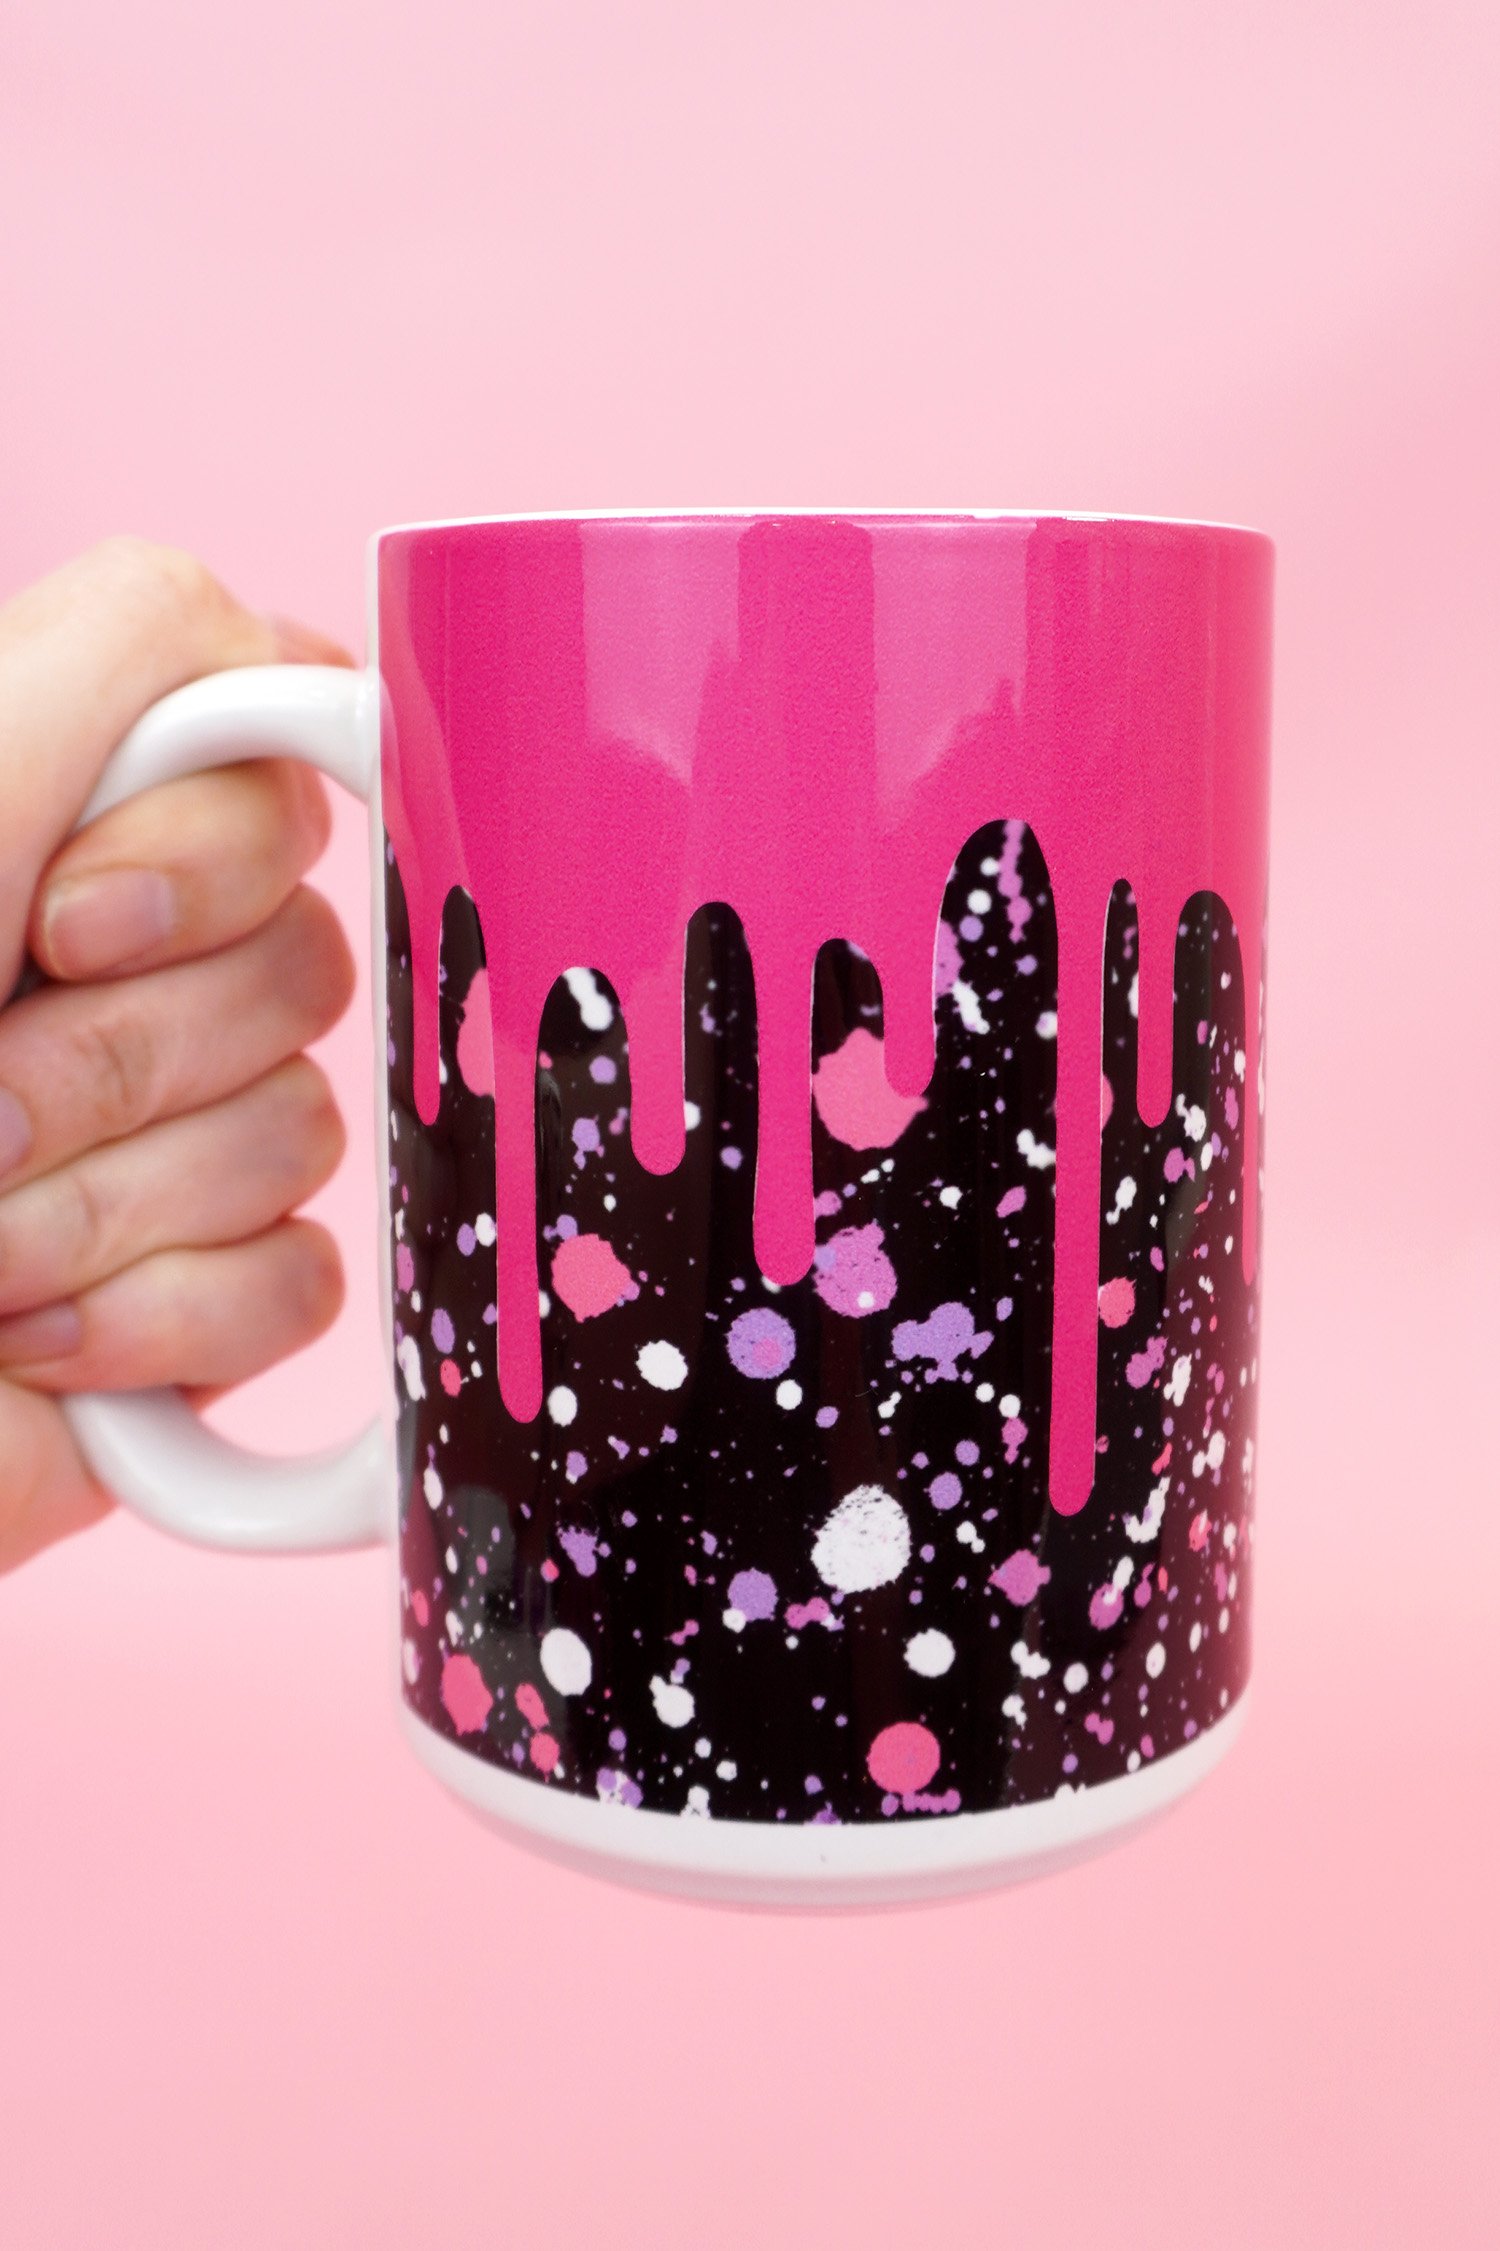 Hand holding pink and black "drippy" mug on a pink background